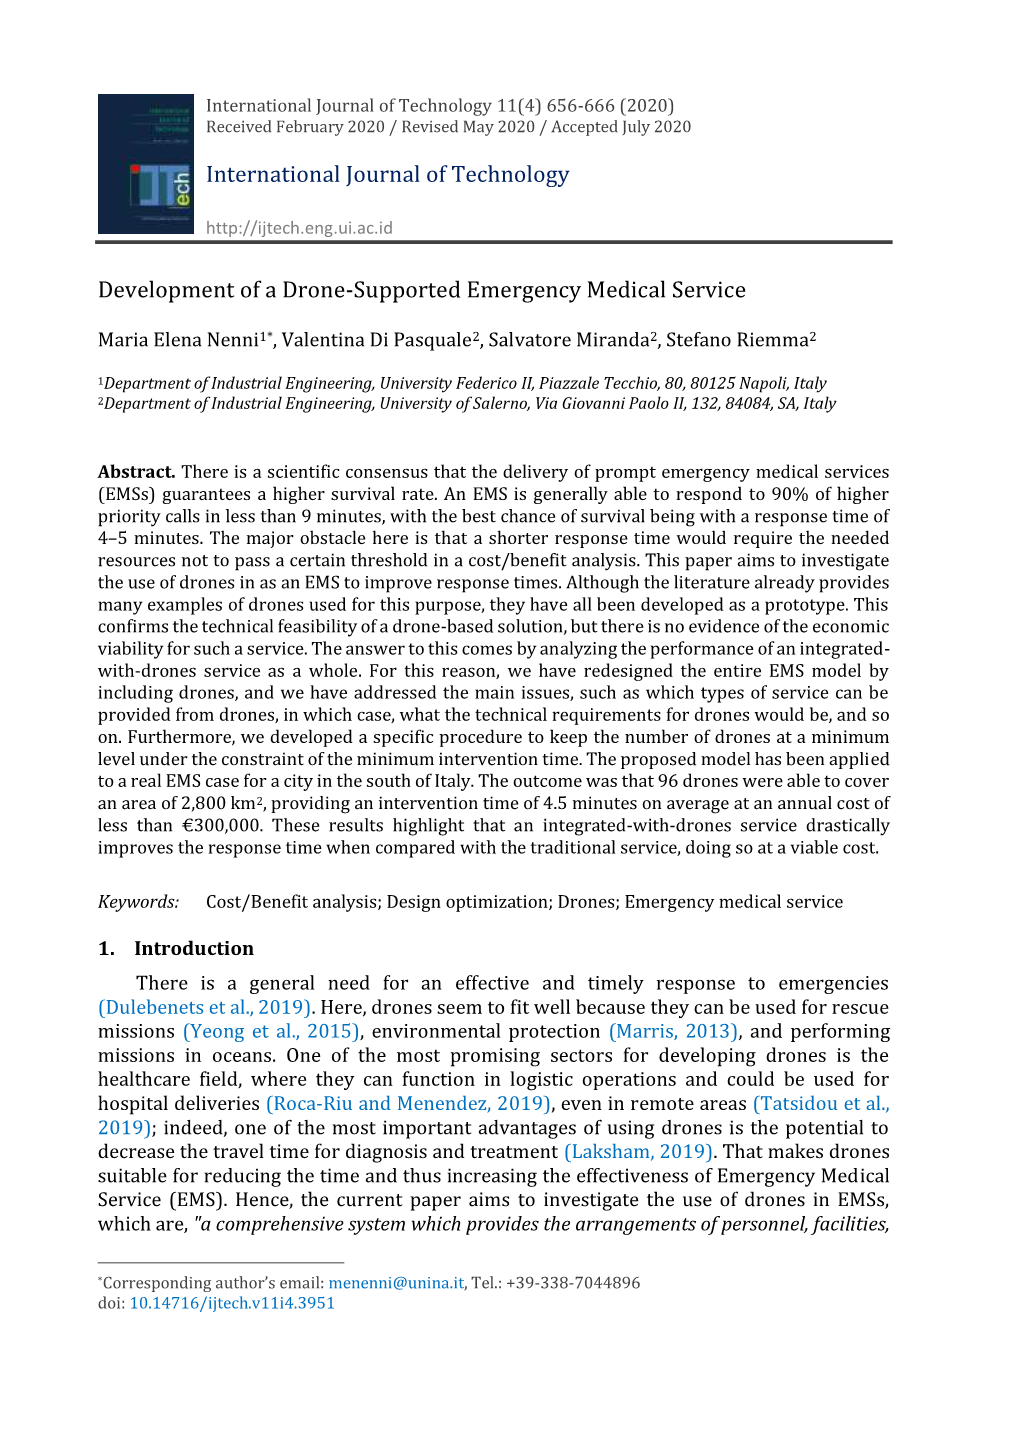 Development of a Drone-Supported Emergency Medical Service